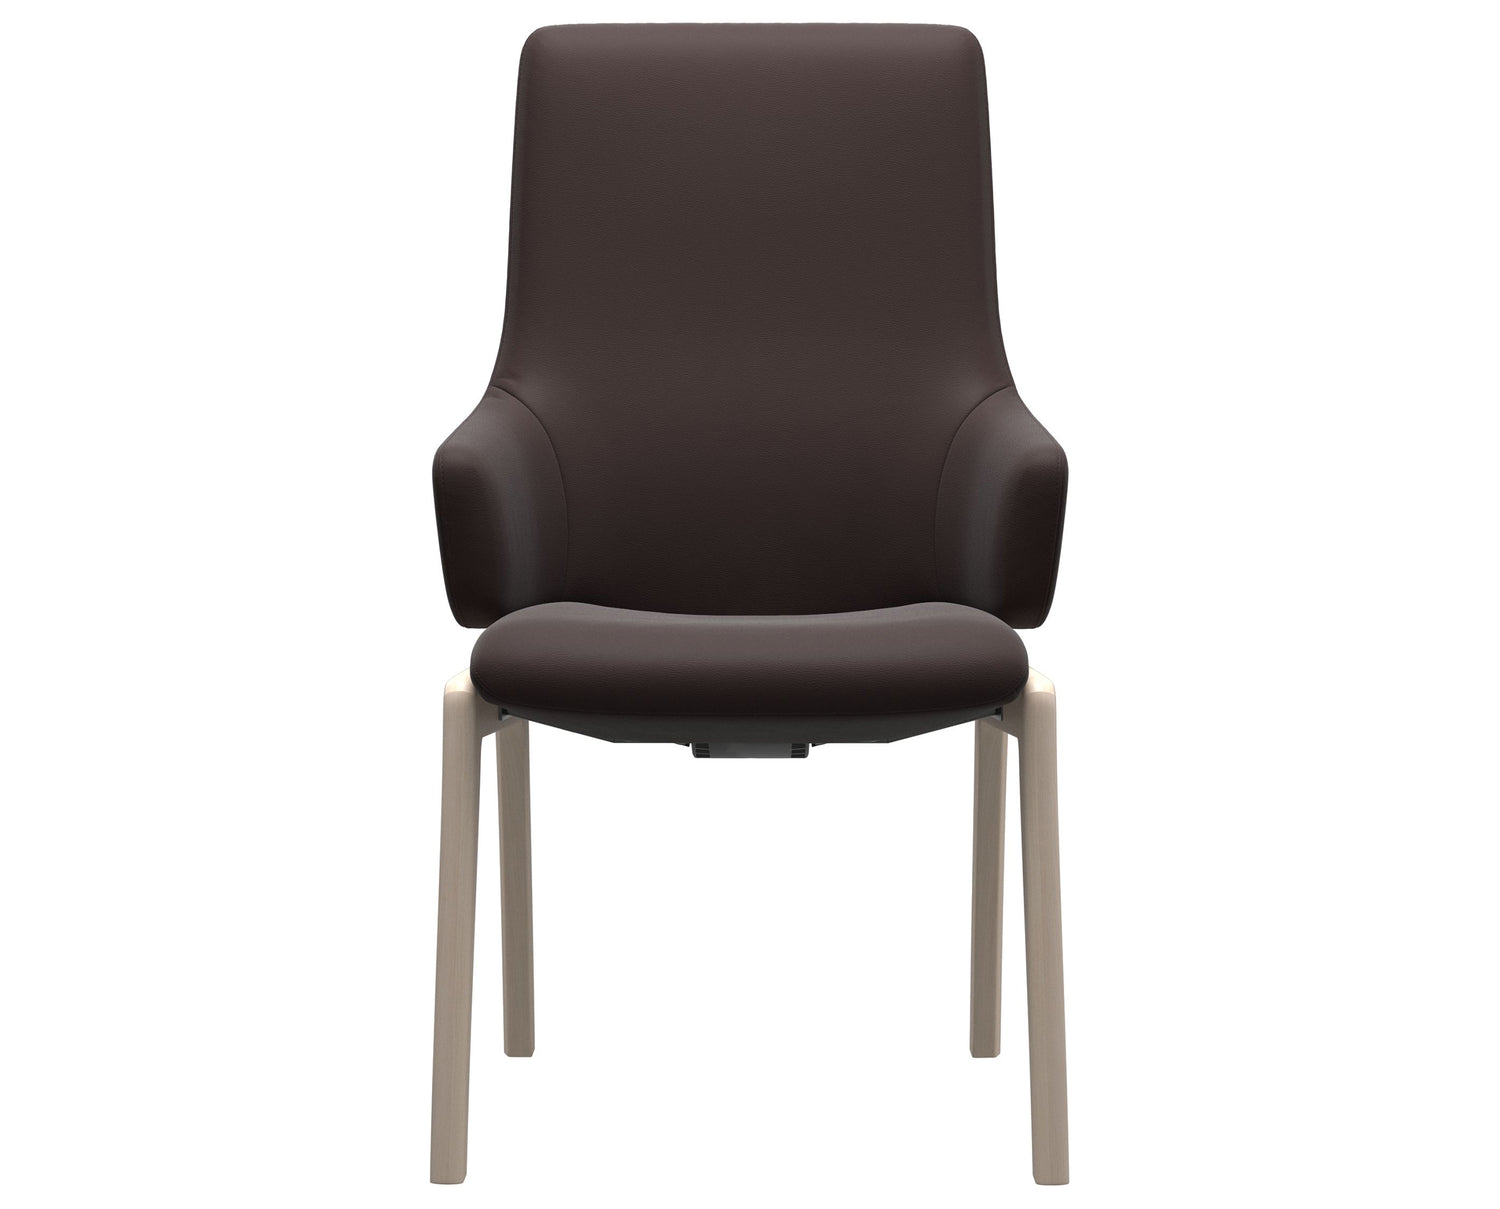 Paloma Leather Chocolate & Whitewash Base | Stressless Laurel High Back D100 Dining Chair w/Arms | Valley Ridge Furniture